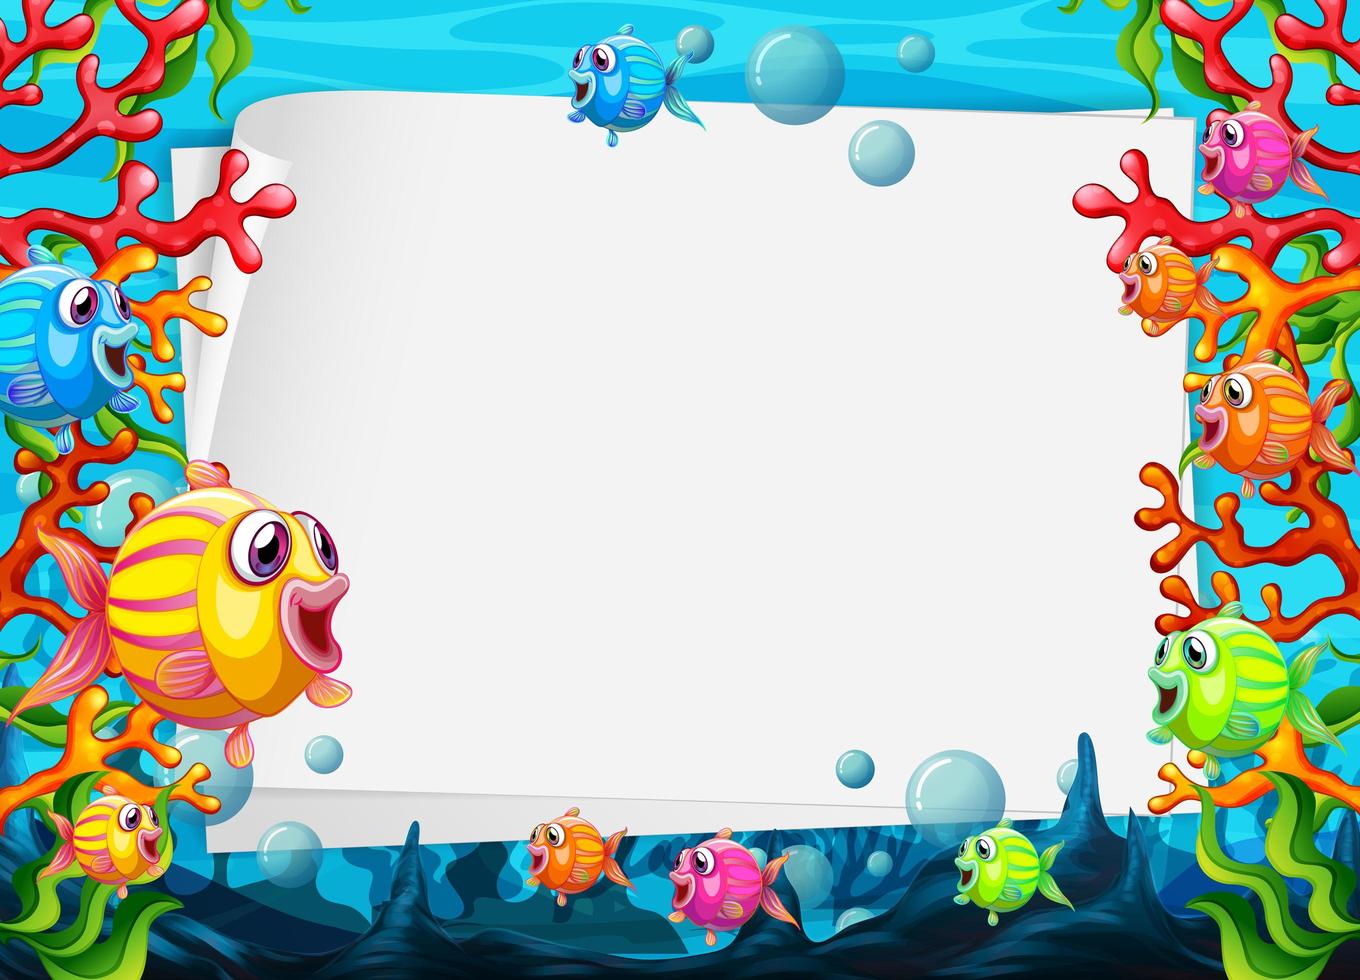 Blank paper template with colorful exotic fishes cartoon character in the underwater scene vector